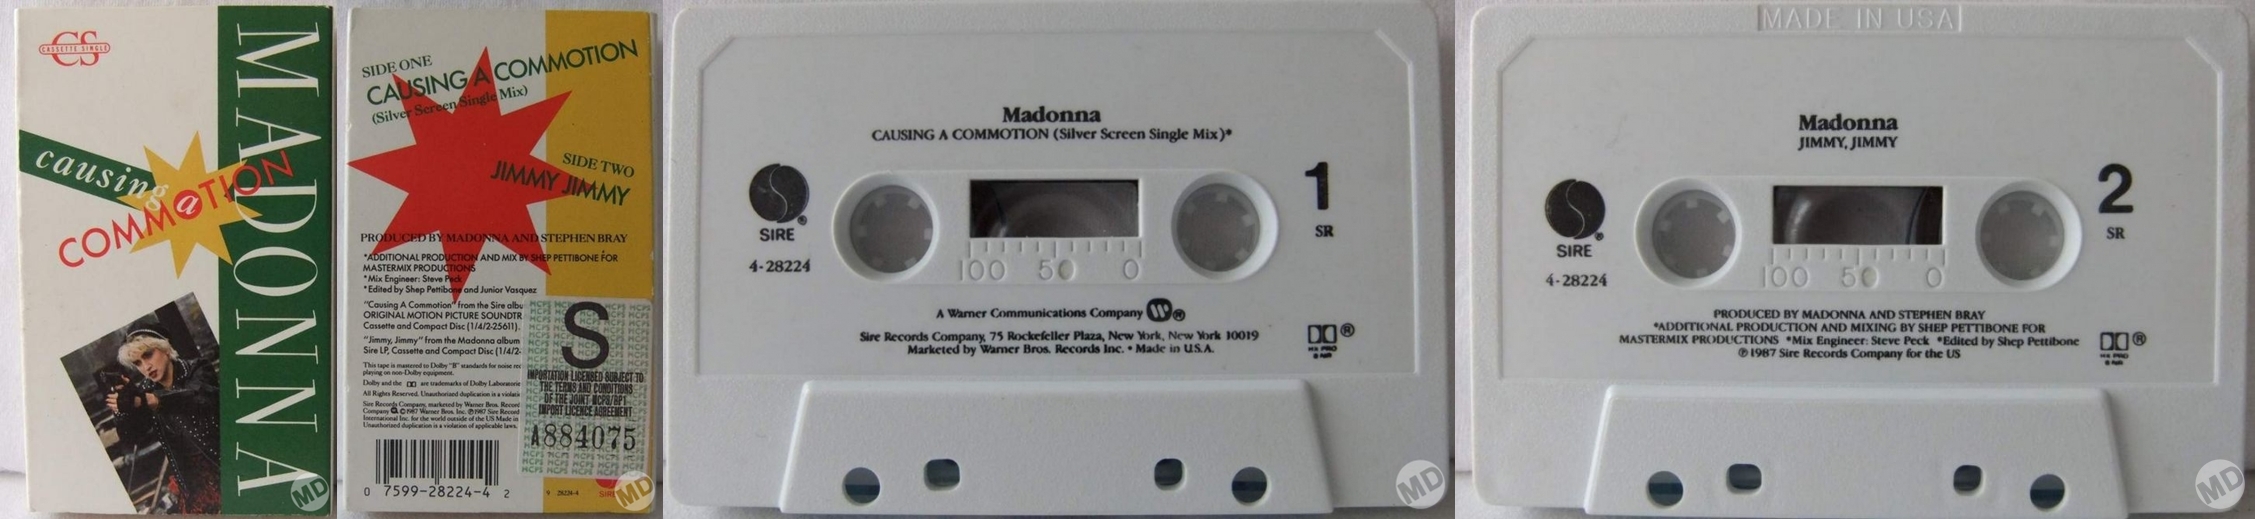 madonna-causing-a-commotion-cassette-sin